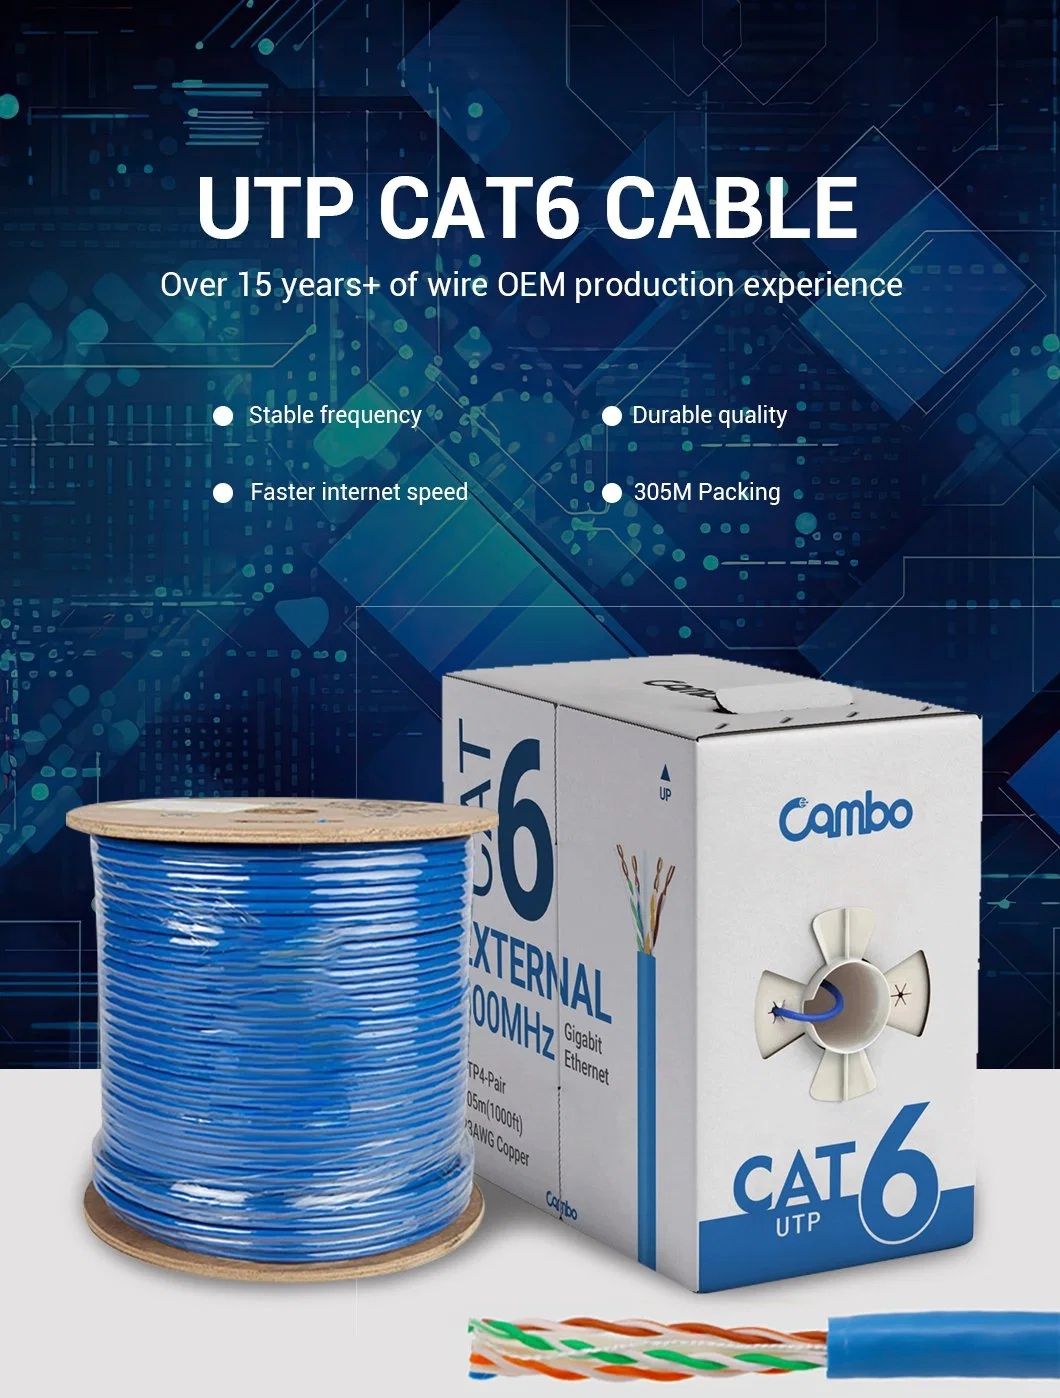 Soft Cable Bulk CCA Bc Copper UTP Ethernet Cable 100m 305m Roll 550MHz Cat5 CAT6 with Pass Function Test